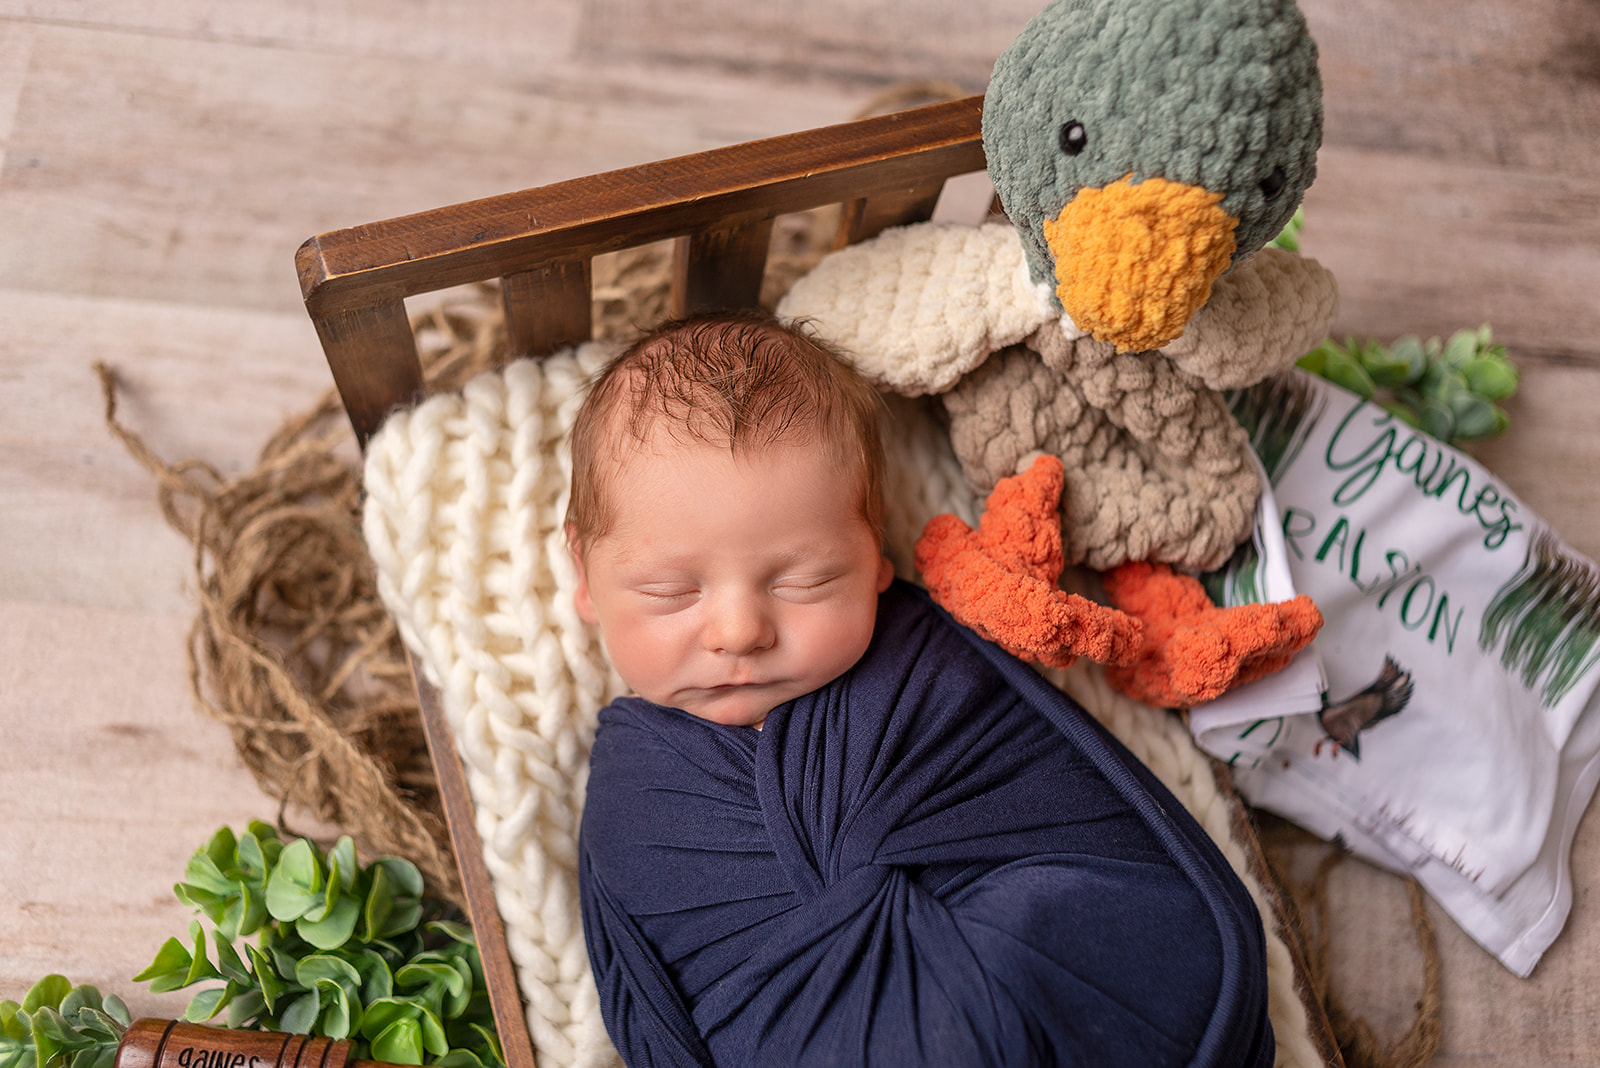 Newborn boy in Celesta Champagne Photography studio in Carthage, Missouri with fishing equipment and a crochet duck